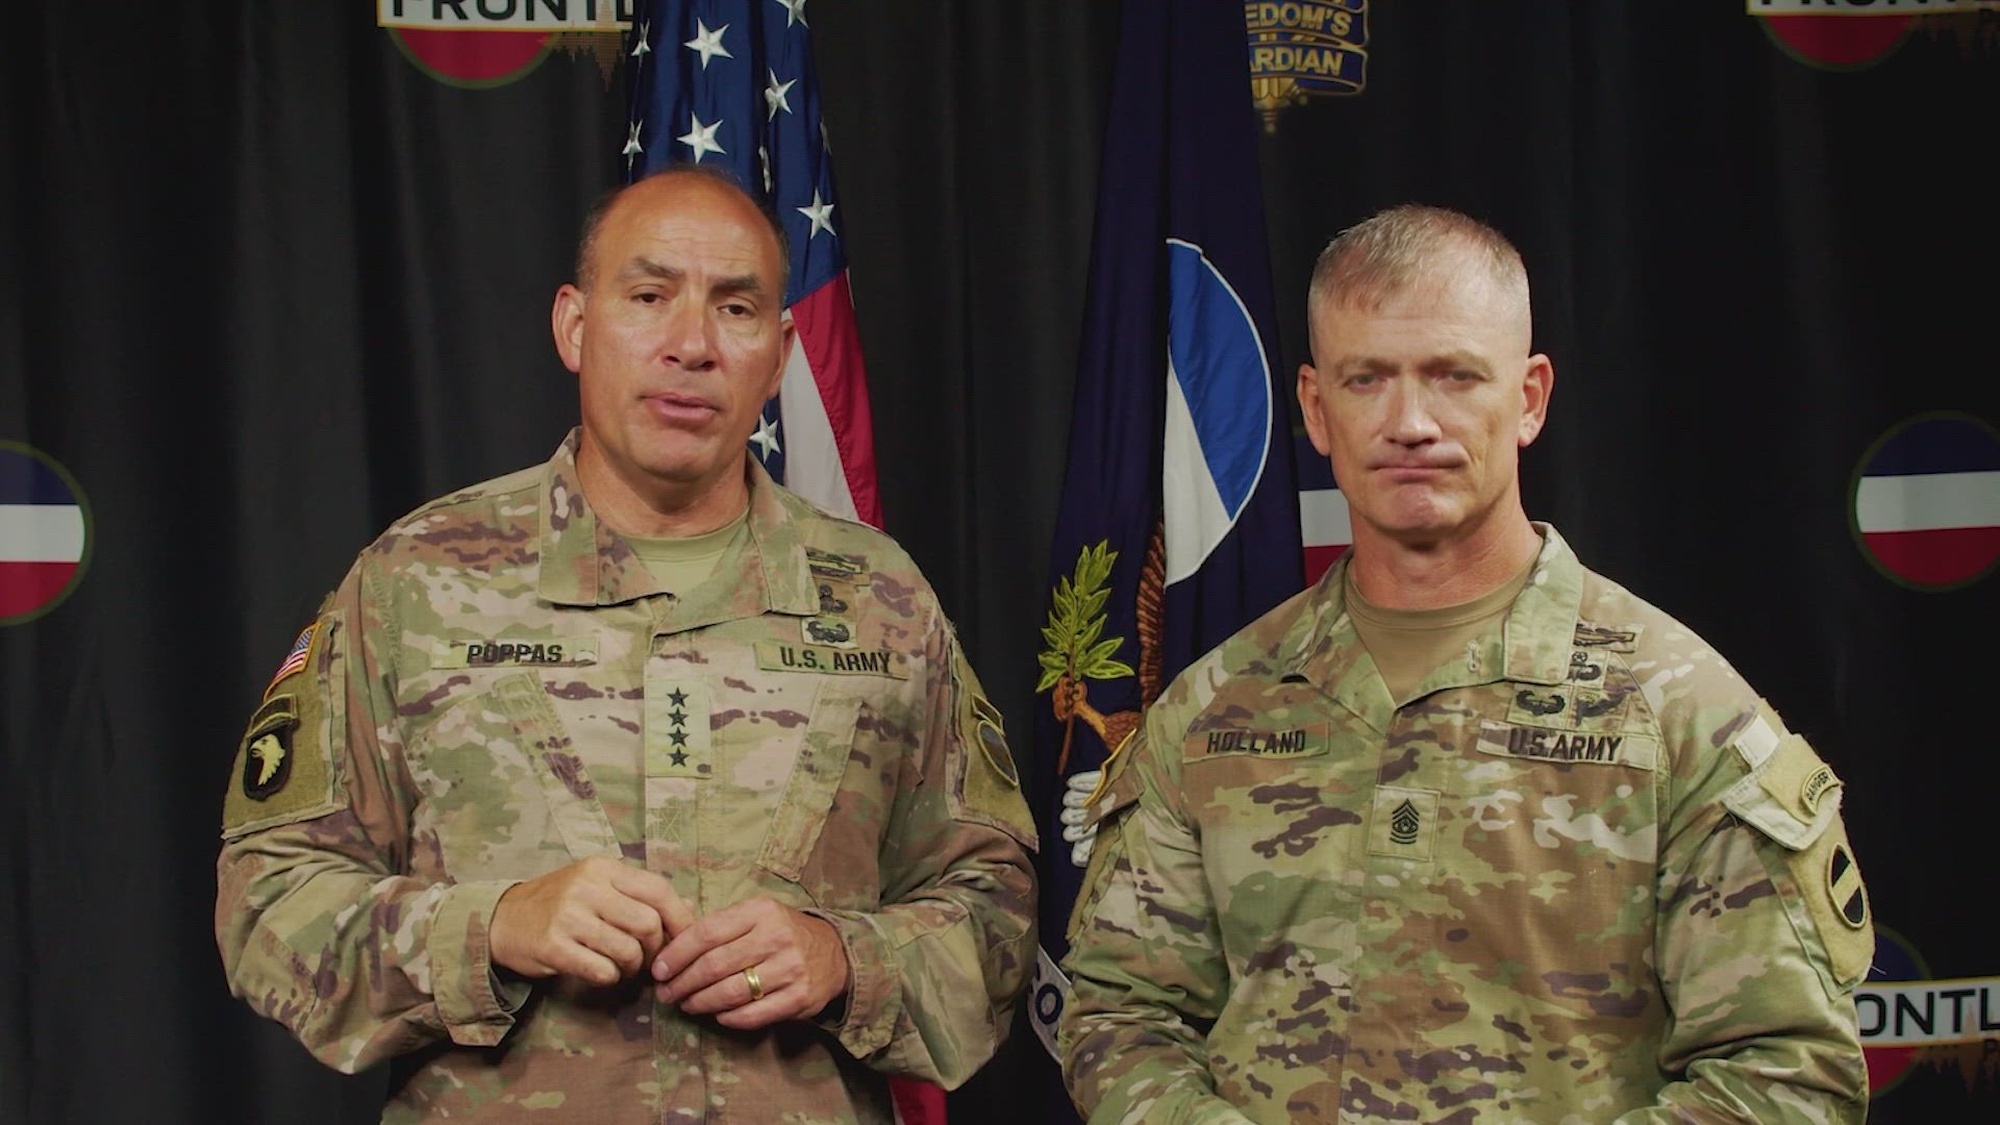 U.S. Army Forces Command, Commanding General Andrew Poppas and Command Sergeant Major TJ Holland discuss suicide prevention and ACE; Ask, Care and Escort. If you are struggling or having  thoughts of harming yourself call 988. You can also speak with a Chaplain, Military Family Life Counselors for help.